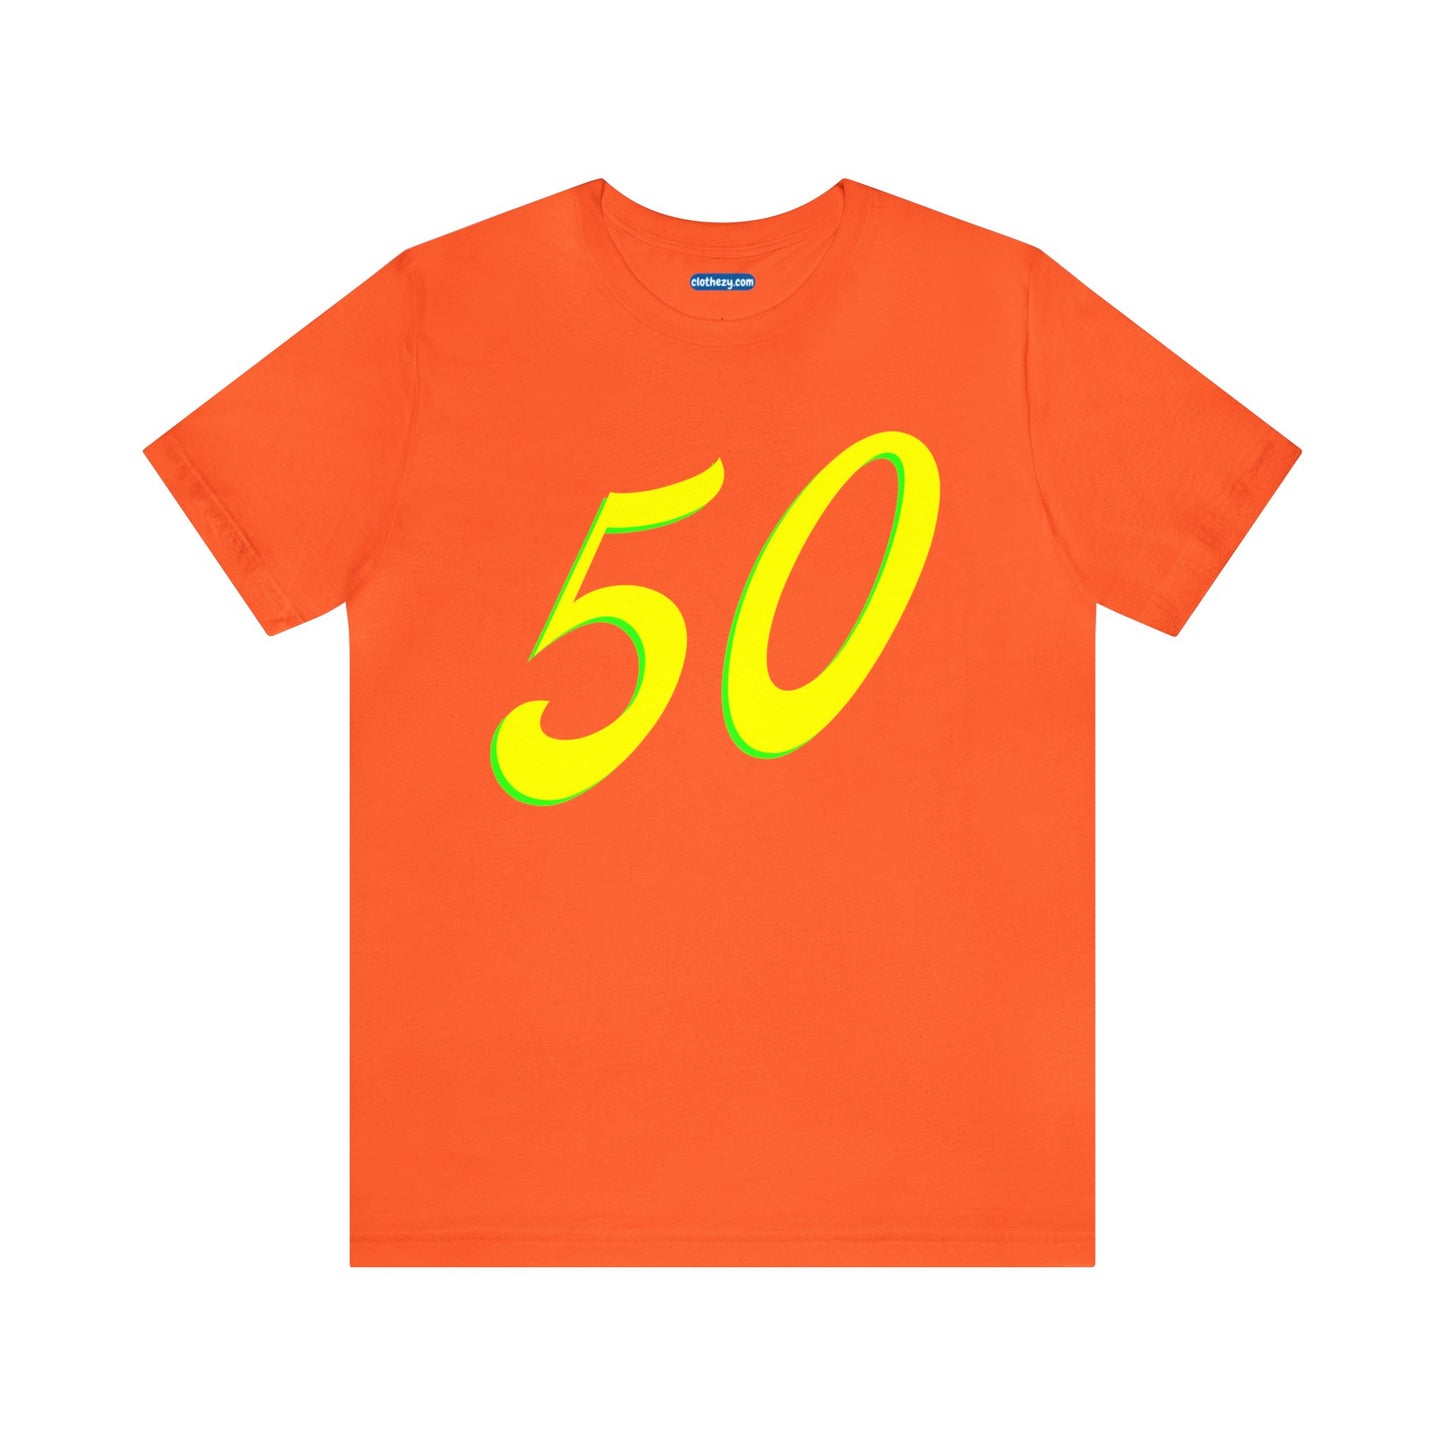 Number 50 Design - Soft Cotton Tee for birthdays and celebrations, Gift for friends and family, Multiple Options by clothezy.com in Orange Size Small - Buy Now